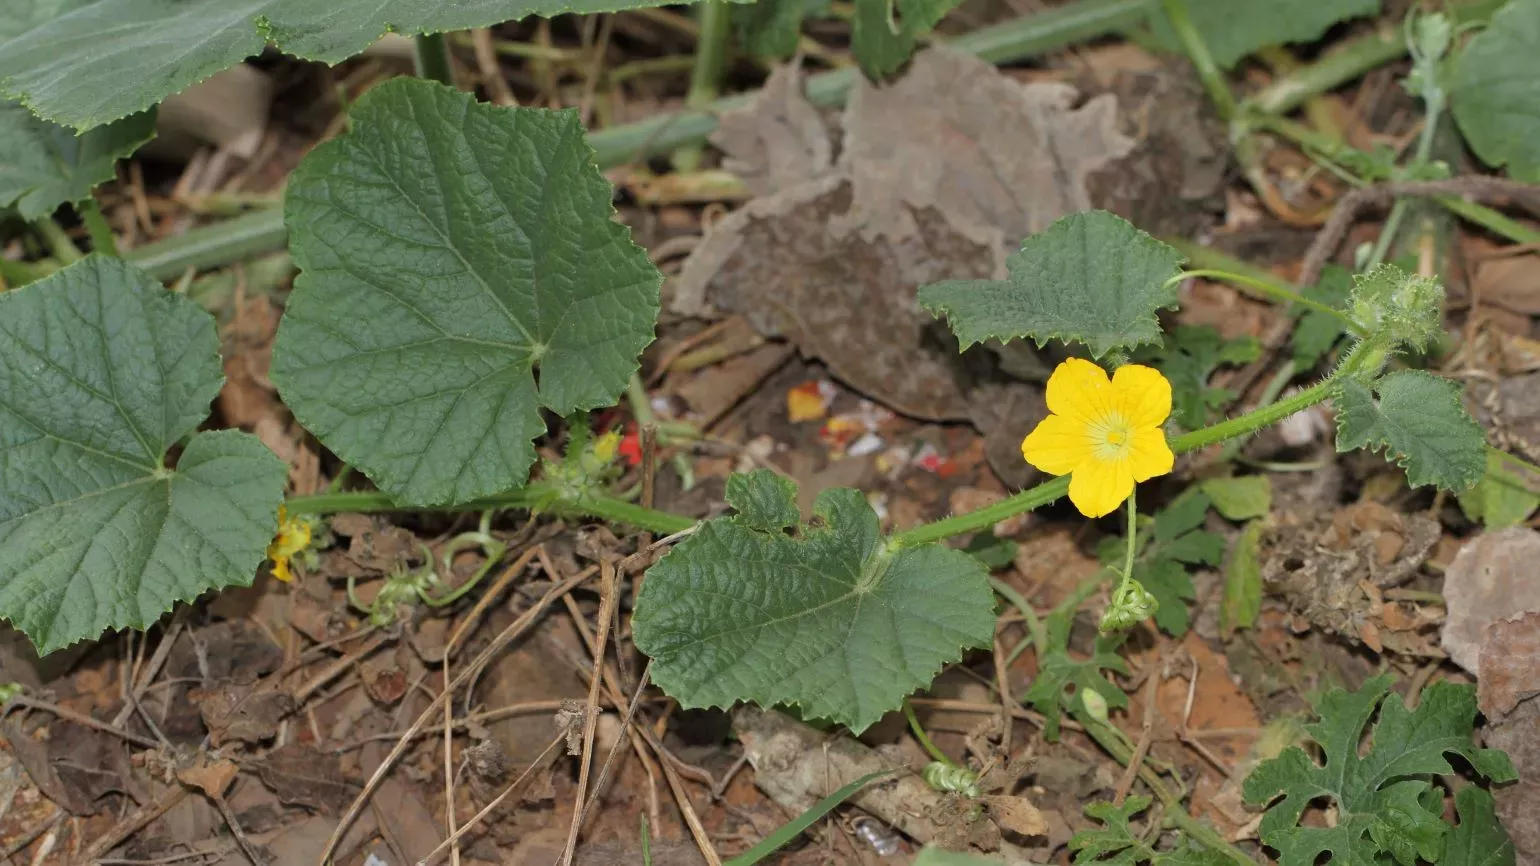 Large leaves and bright yellow flowers of cucumber plant